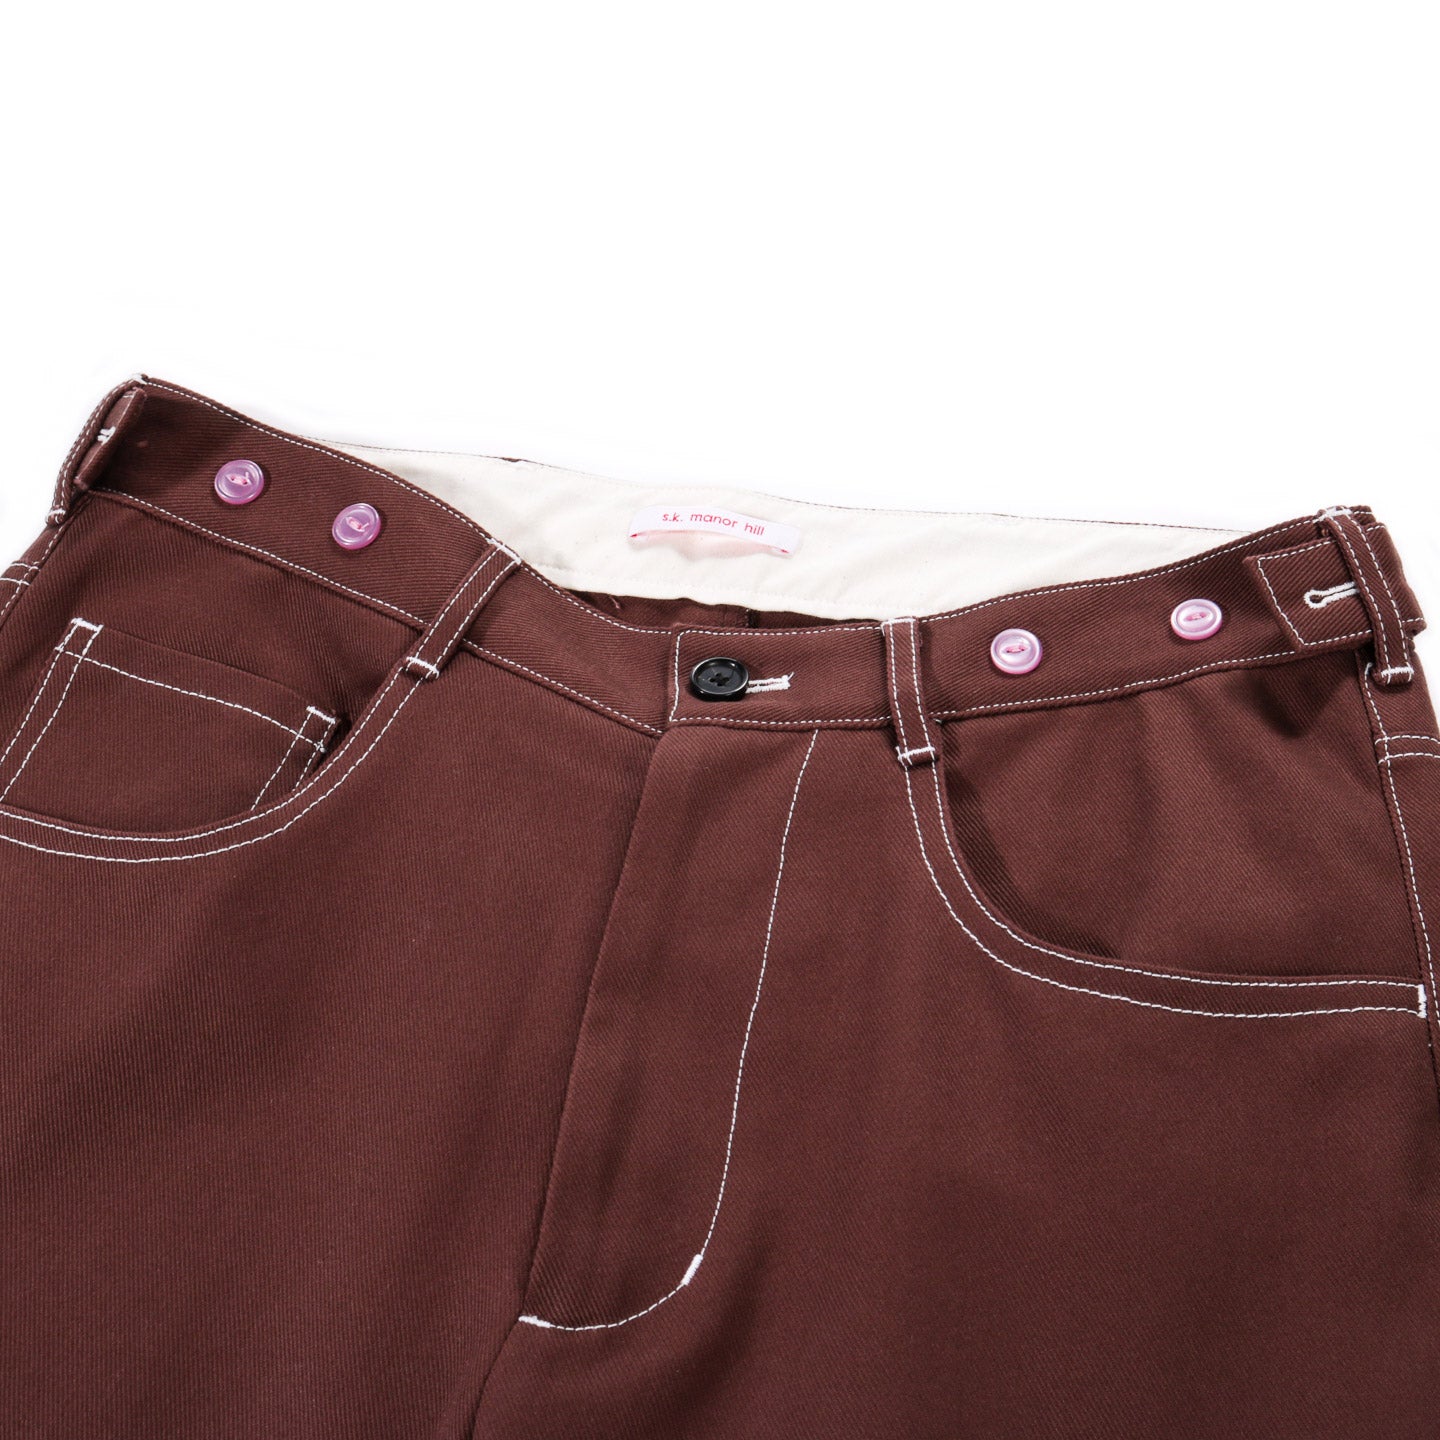 S.K. MANOR HILL RANCH PANT BROWN COTTON TWILL